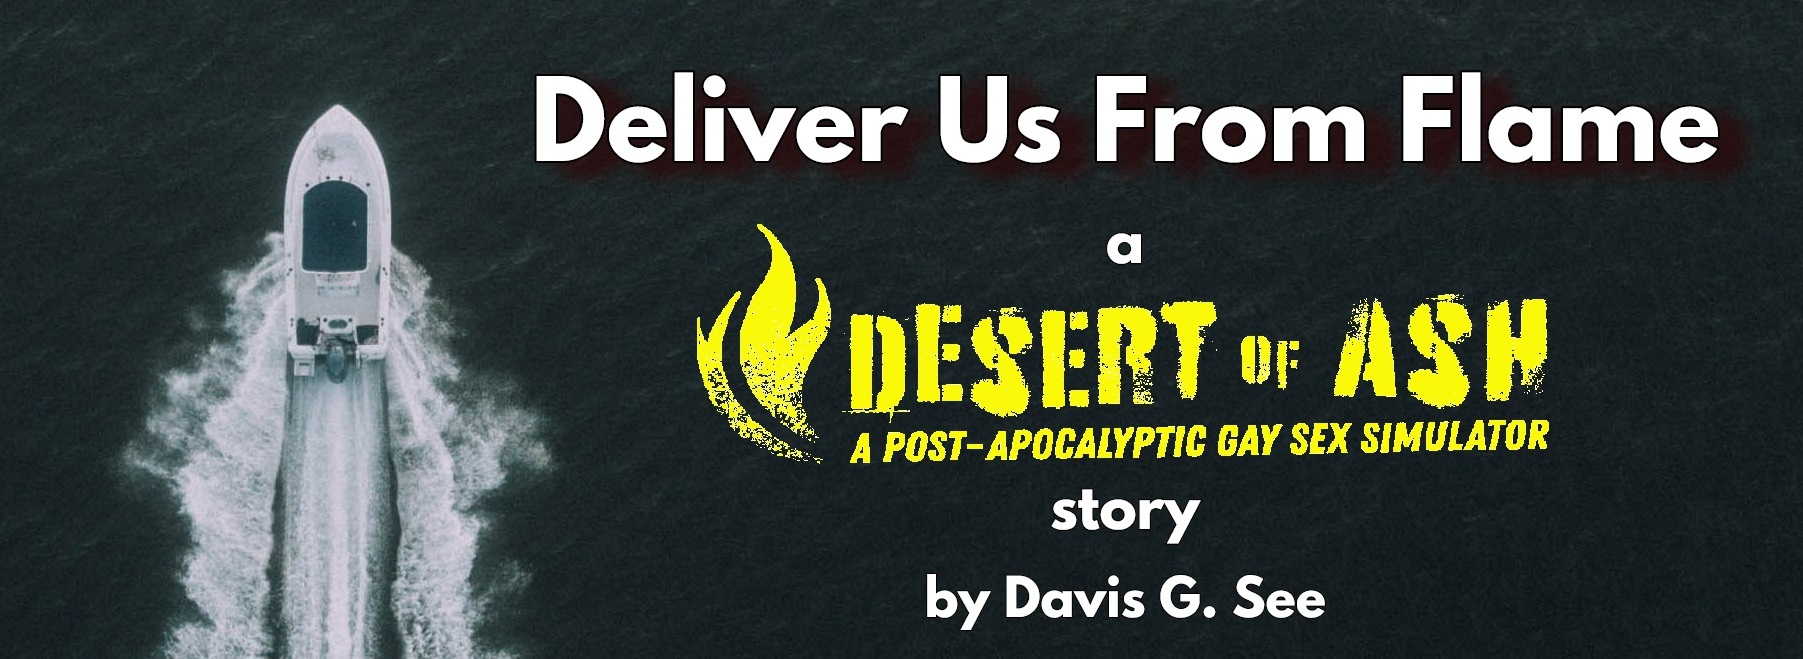 Deliver Us From Flame: a DESERT OF ASH story